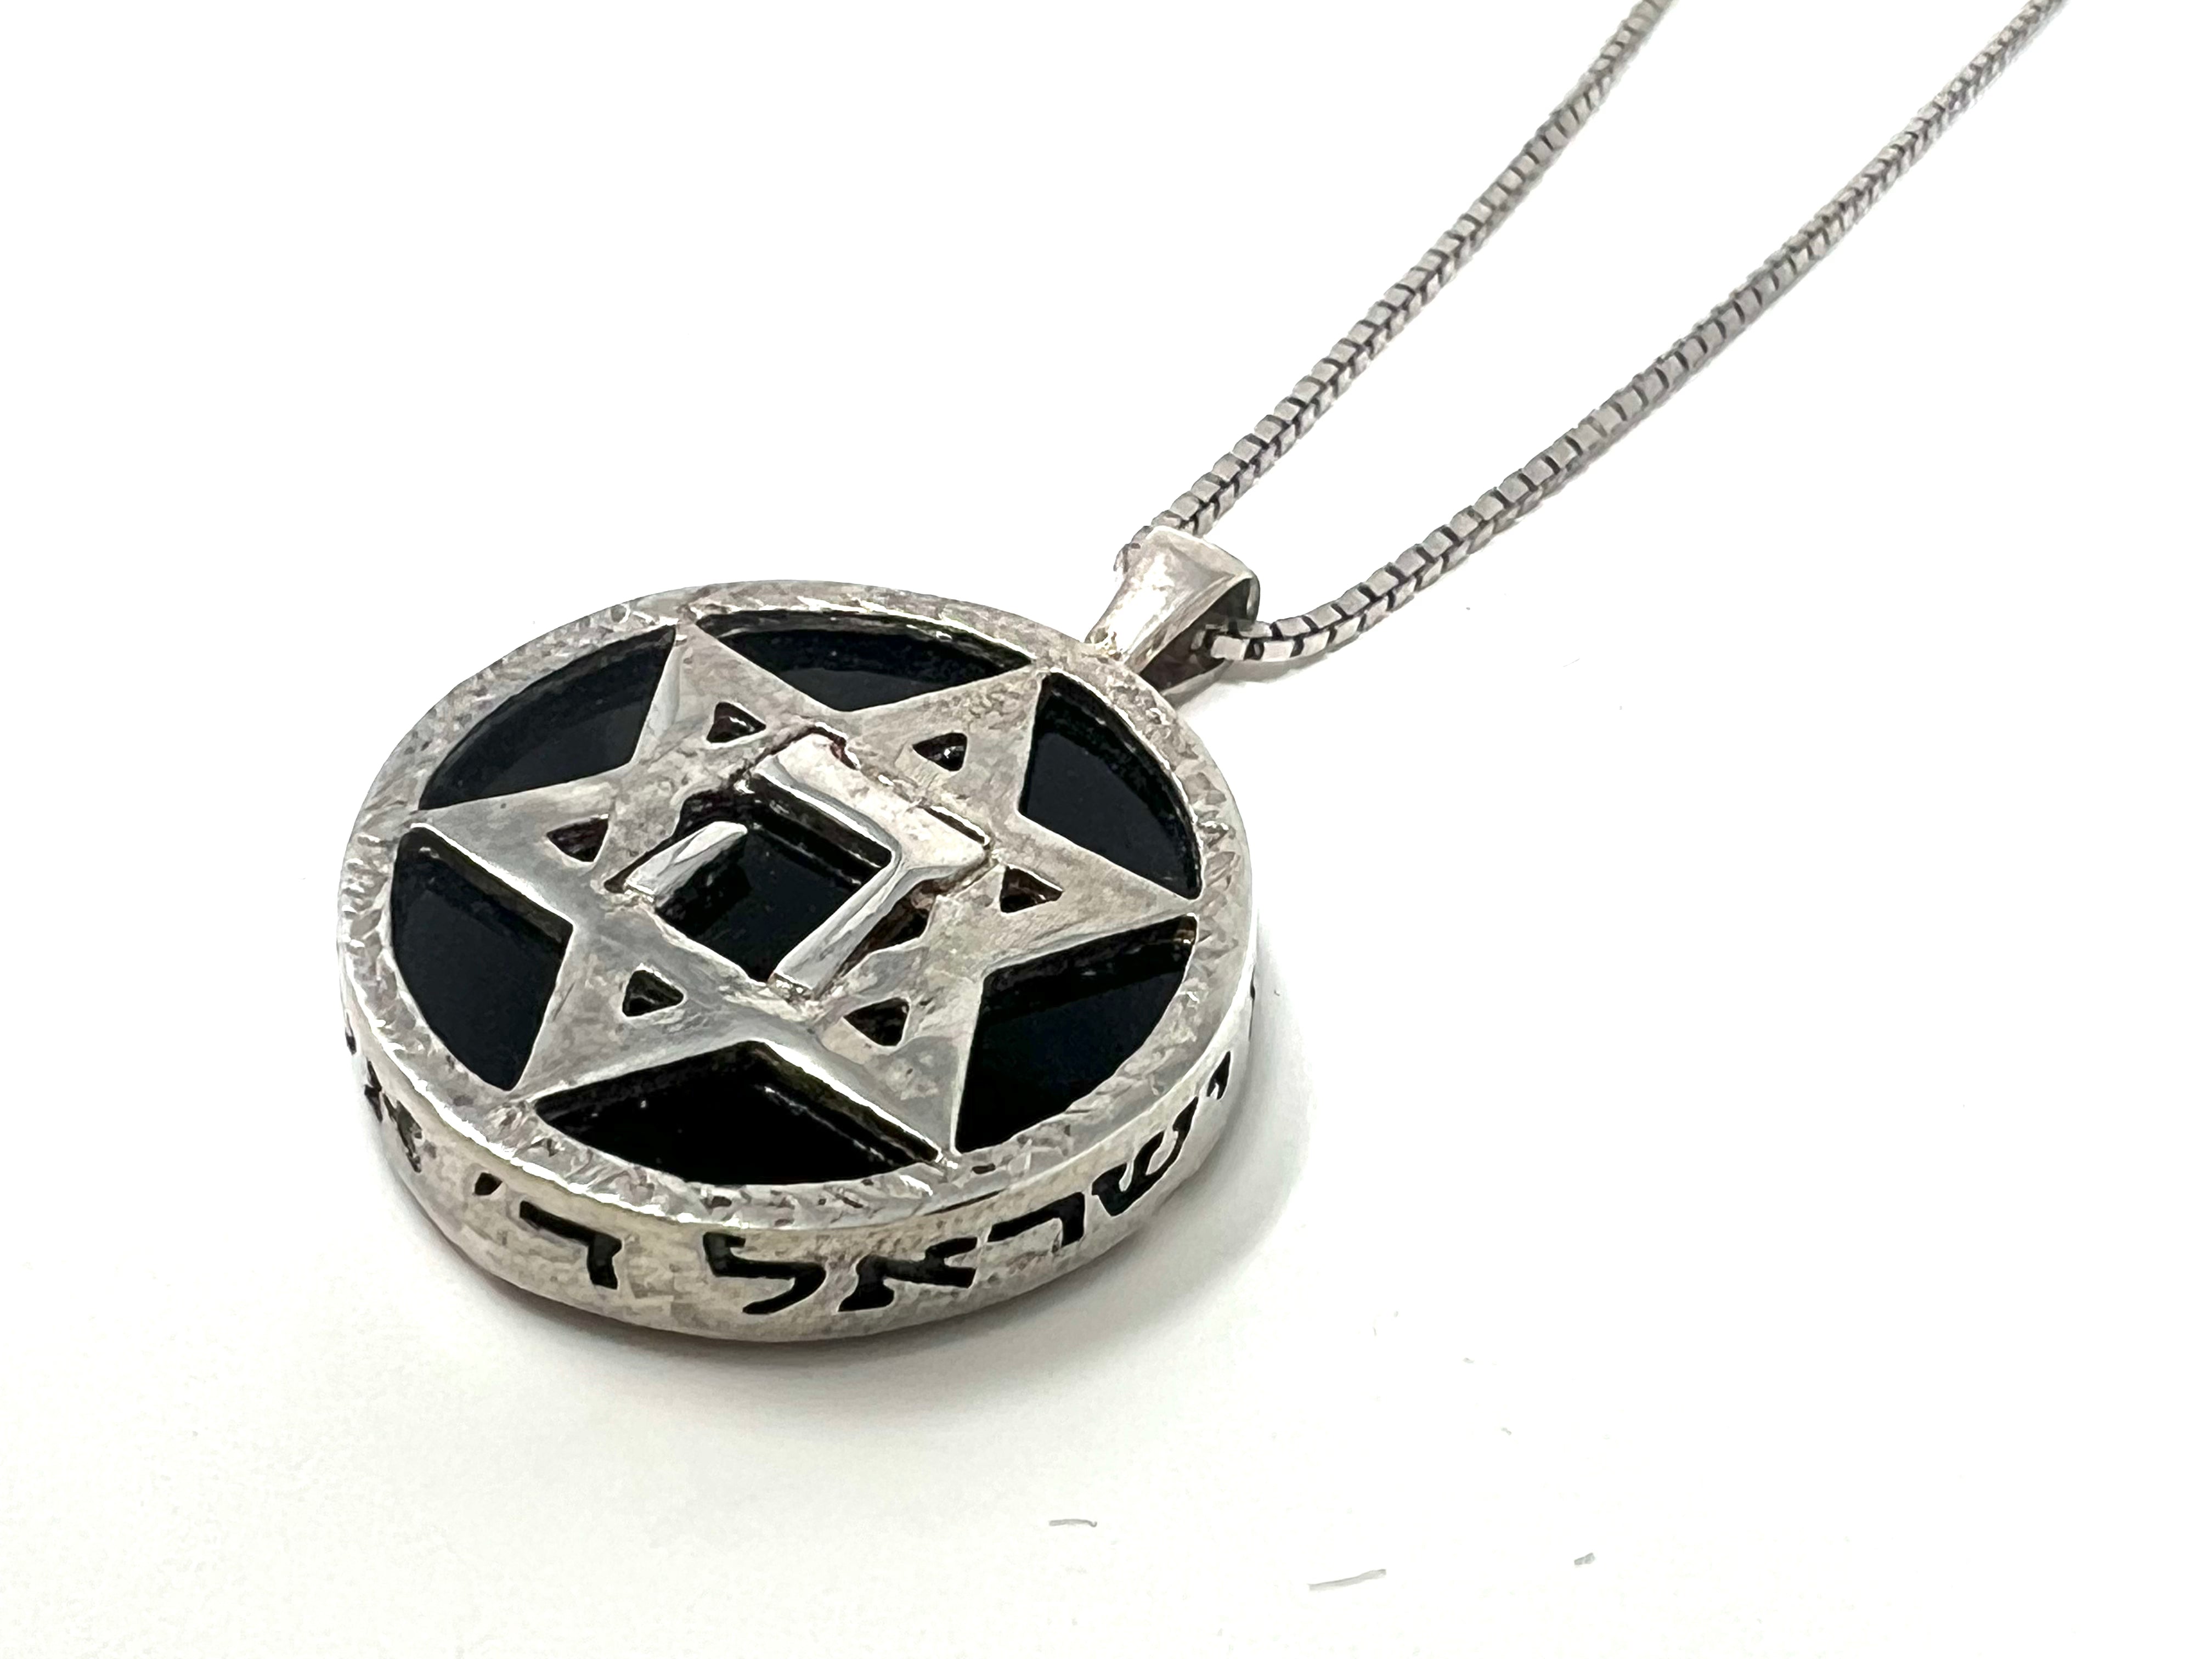 Magen David with Chai Necklace